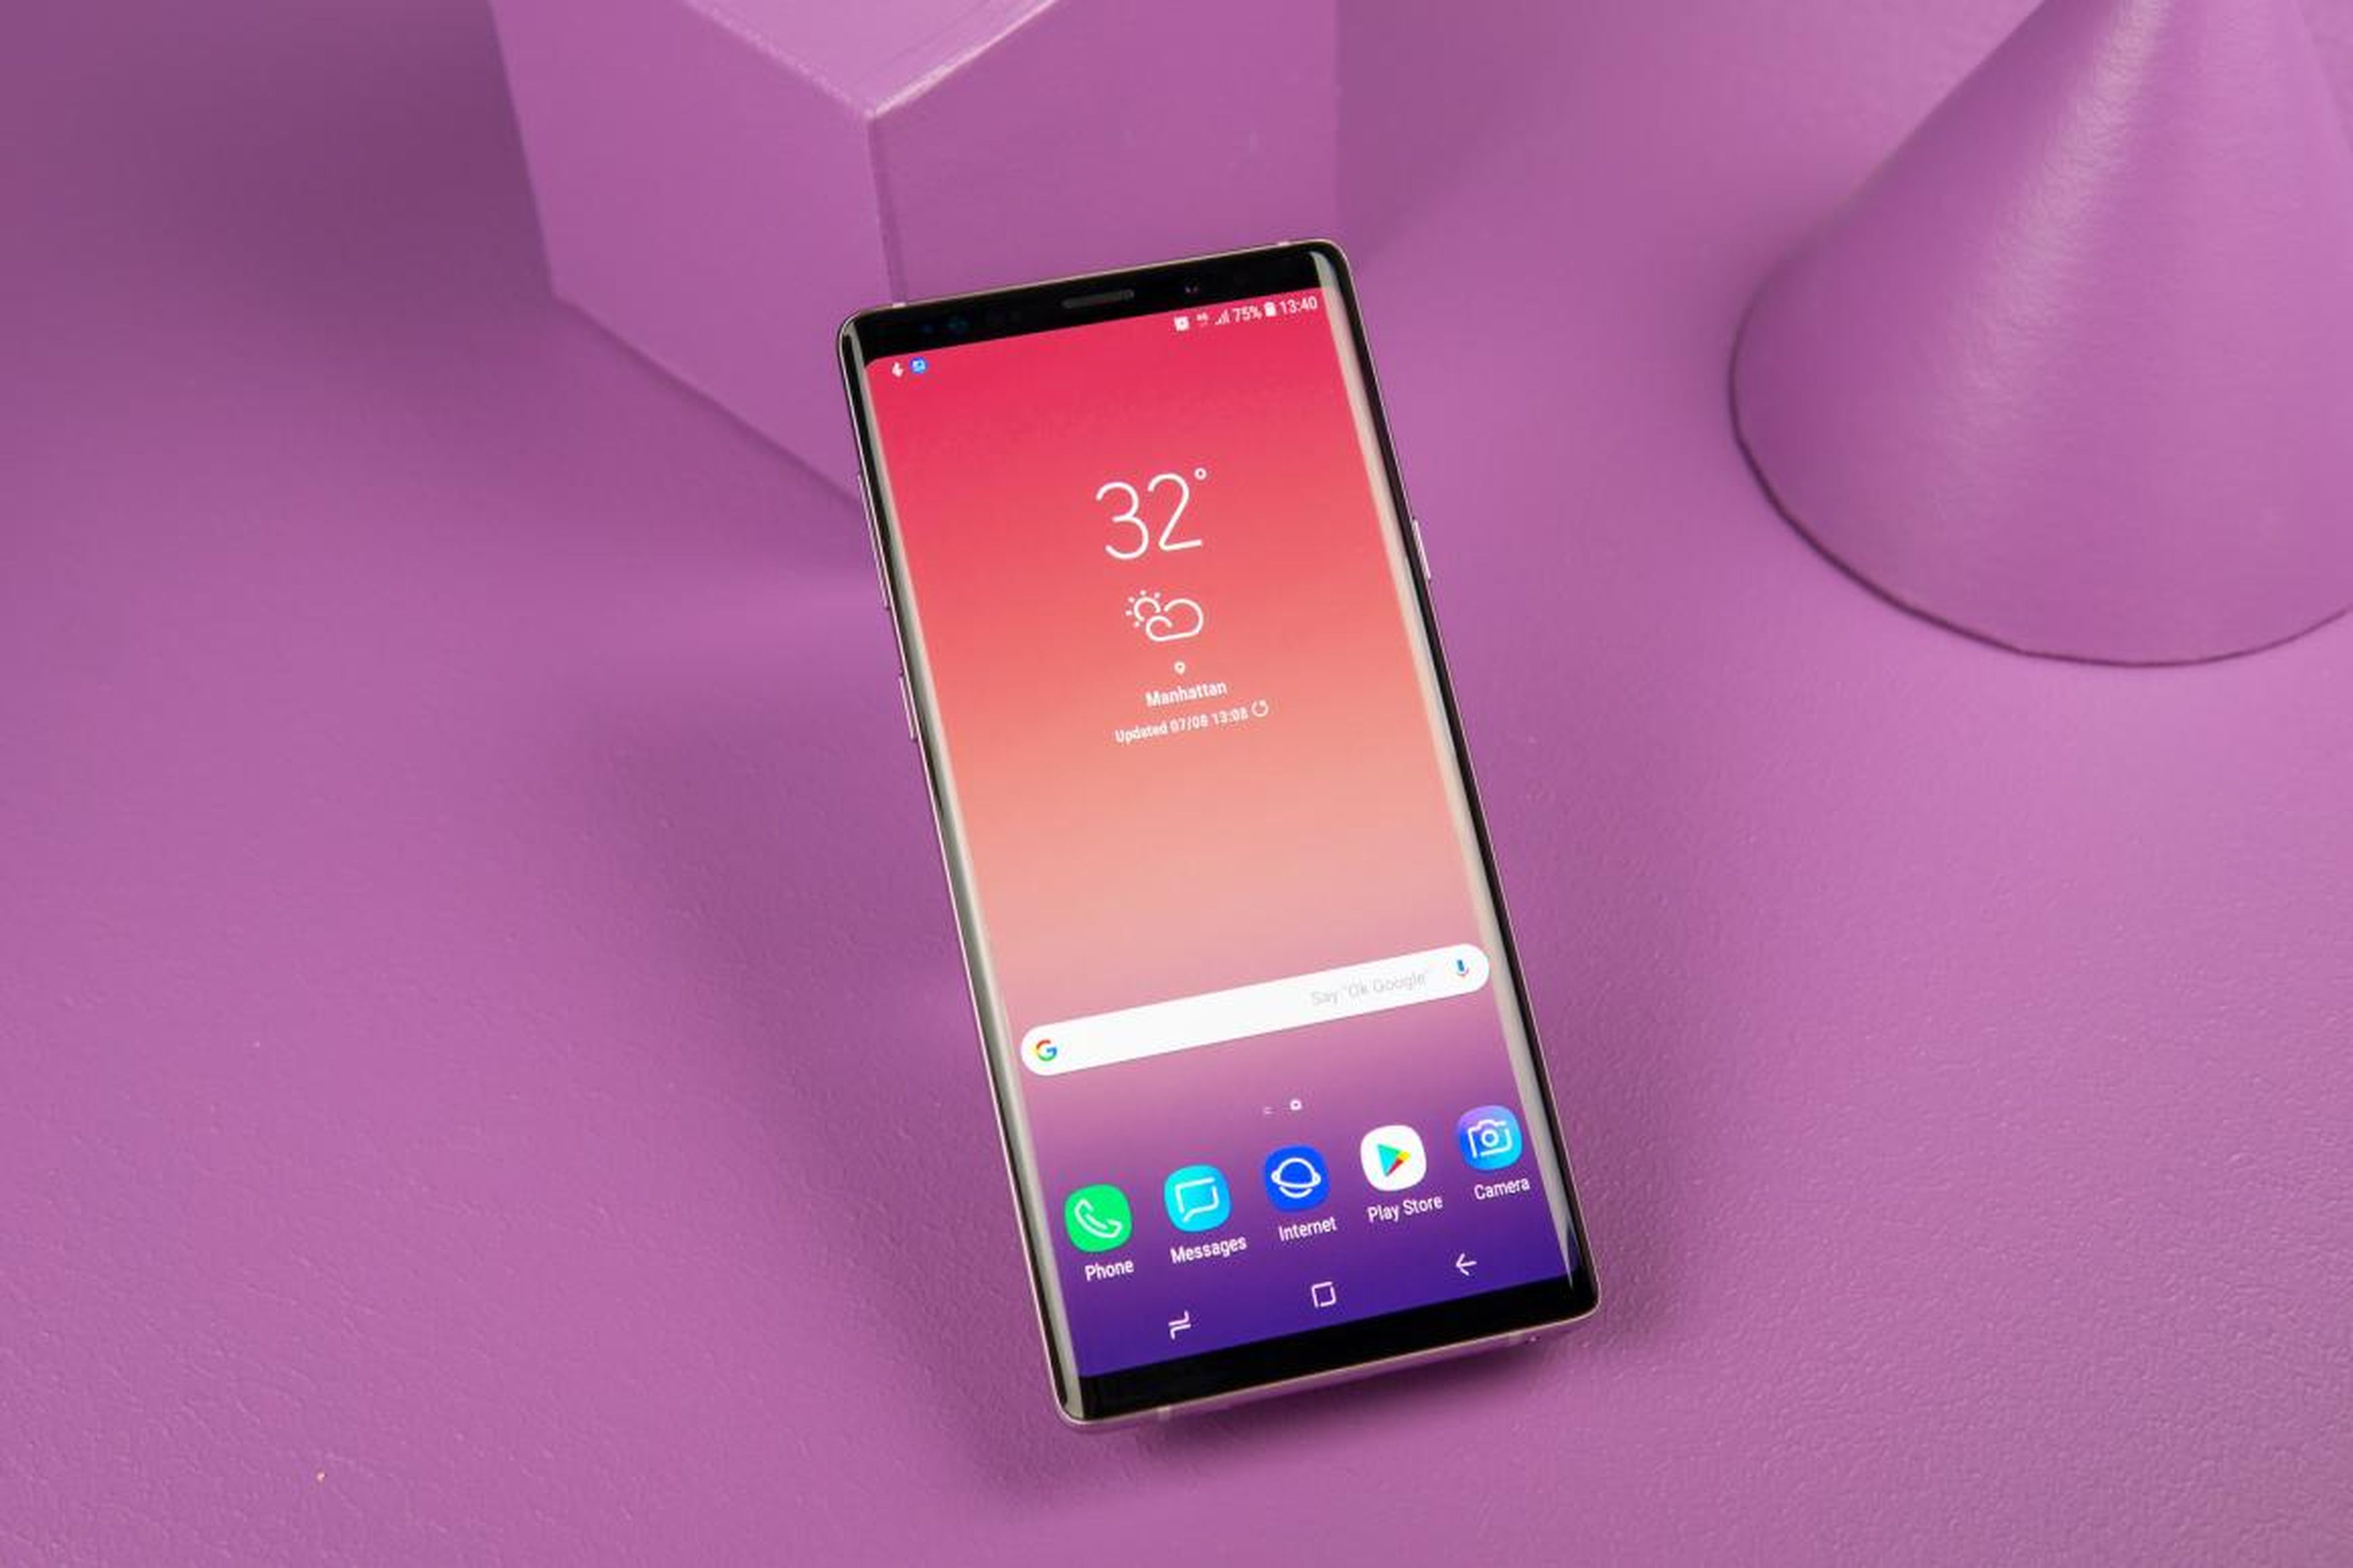 6. The Galaxy Note 9 comes with a newer version of Android than the Galaxy S9.